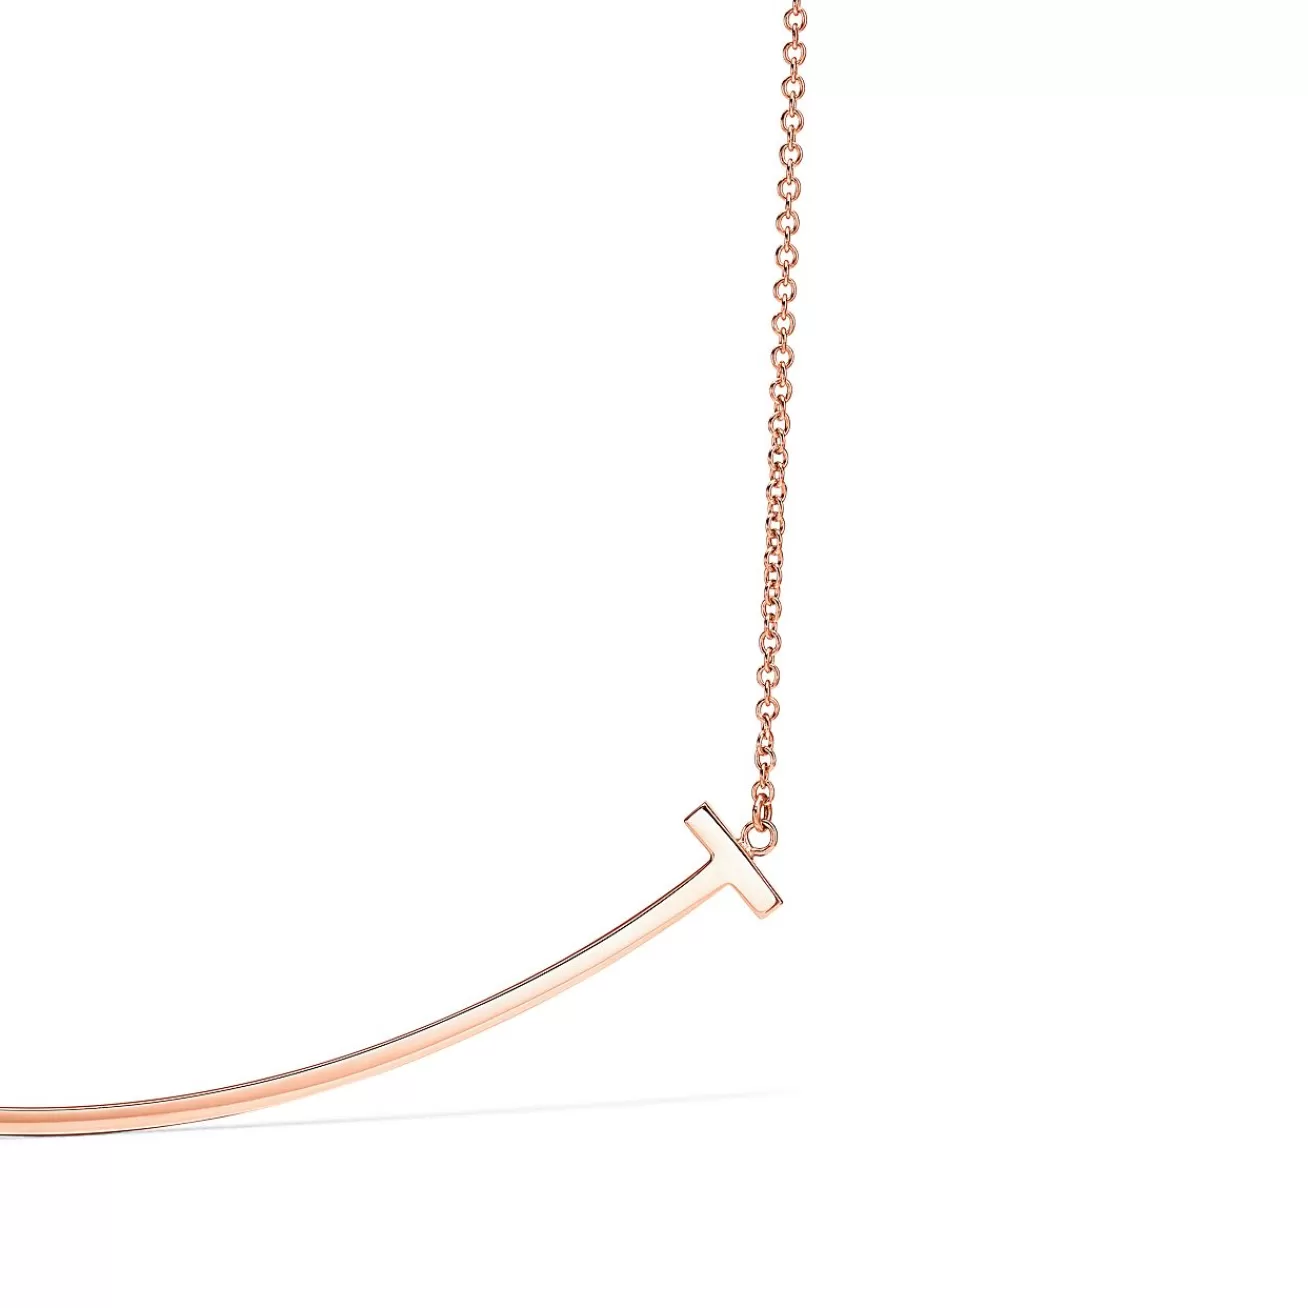 Tiffany & Co. Tiffany T Smile Pendant in Rose Gold, Large | ^ Necklaces & Pendants | Men's Jewelry